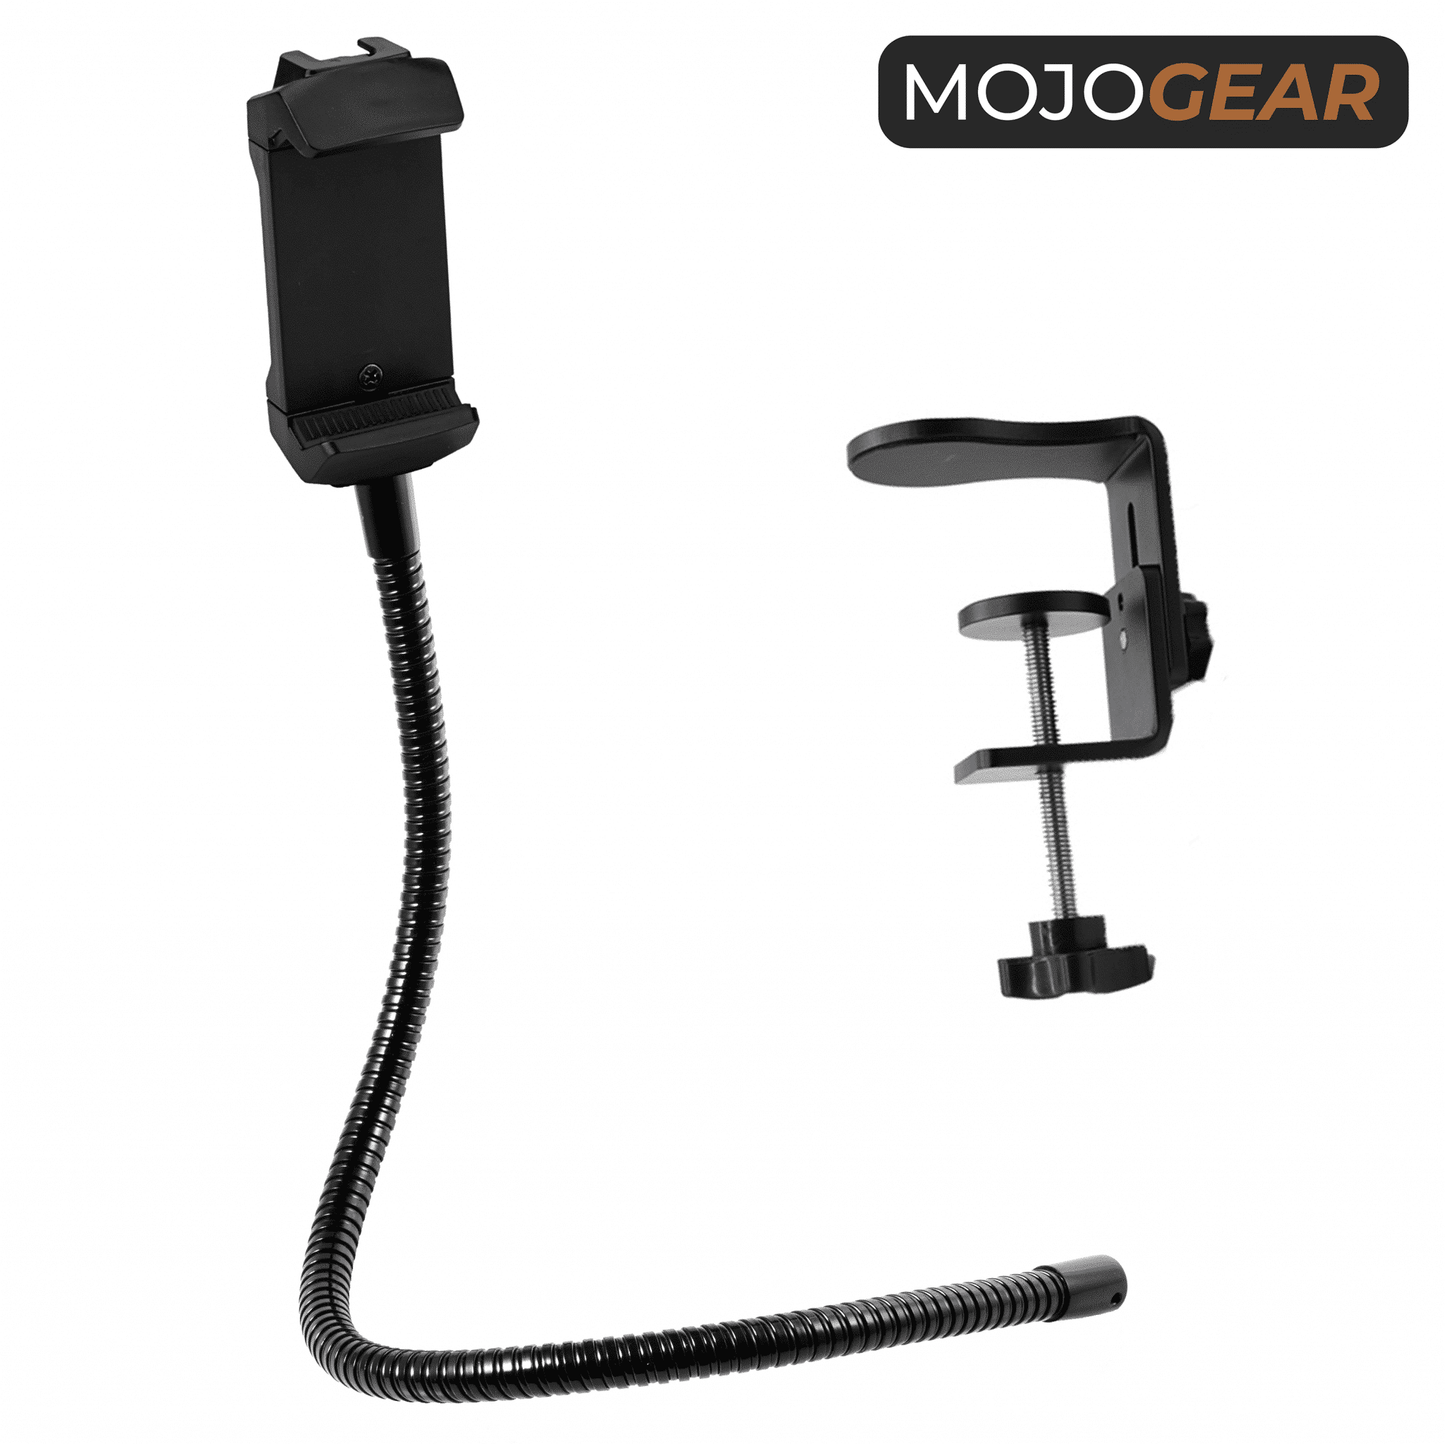 MOJOGEAR Premium Flexible Phone and Tablet Holder with Table Clamp - Metal